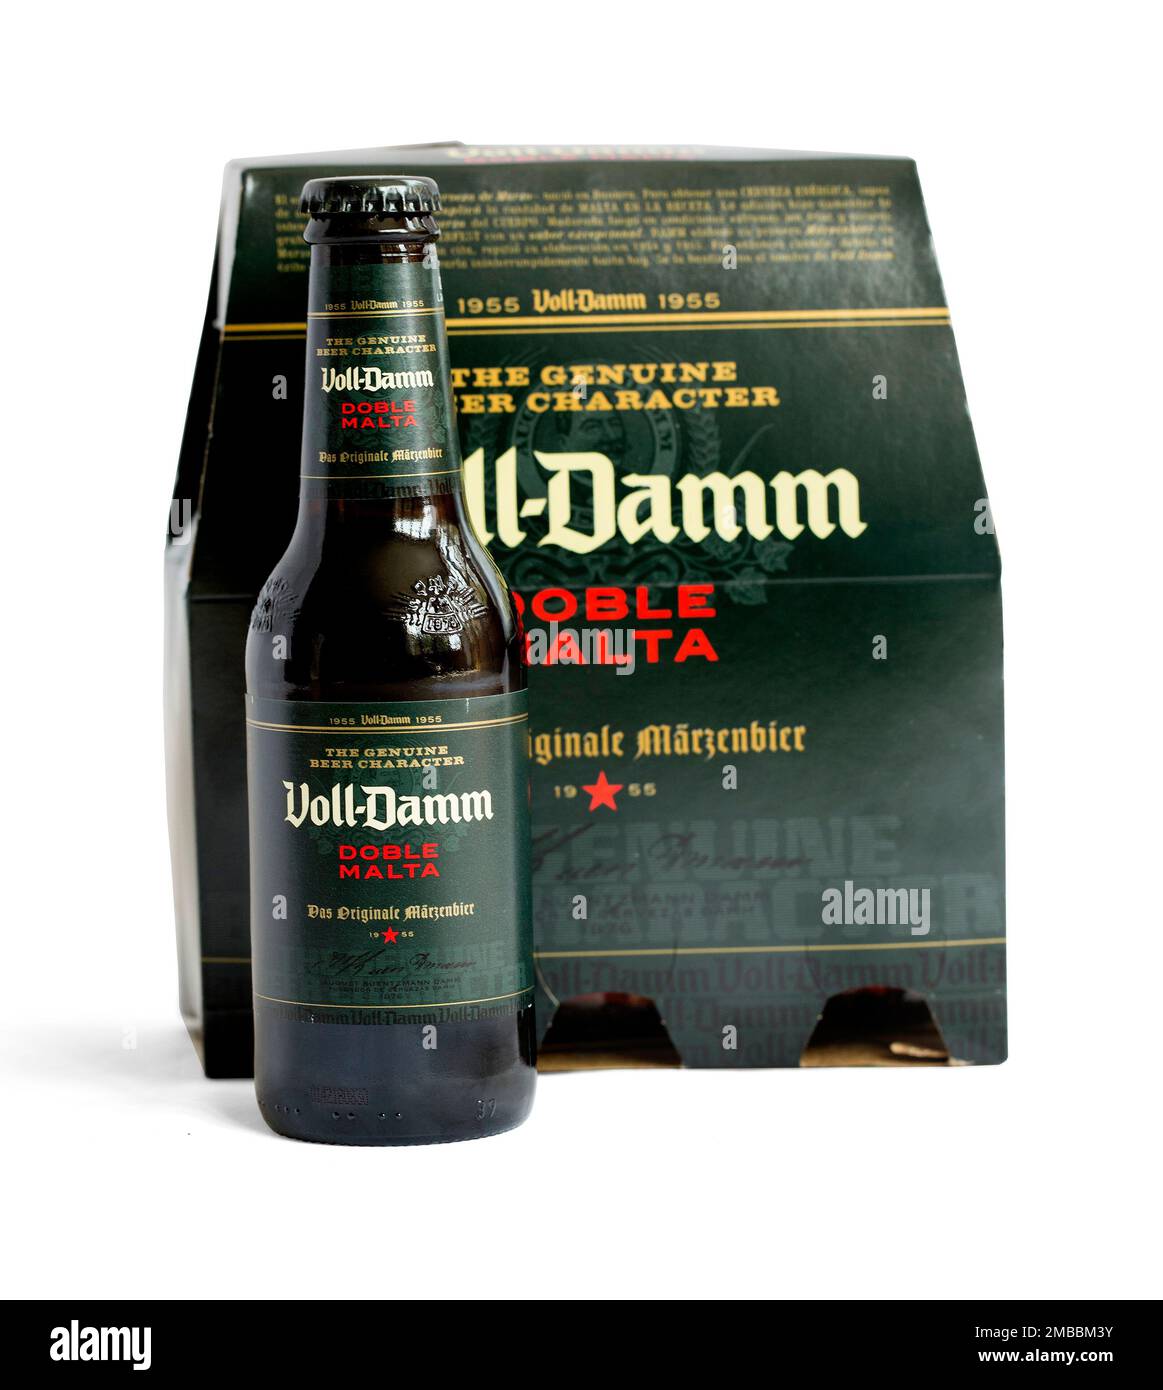 Mallorca, Spain - April 20, 2016: Voll-Damm Doble Malta is a lager and Märzen or Märzenbier-style beer manufactured by S.A. Damm, a brewery in Barcelo Stock Photo